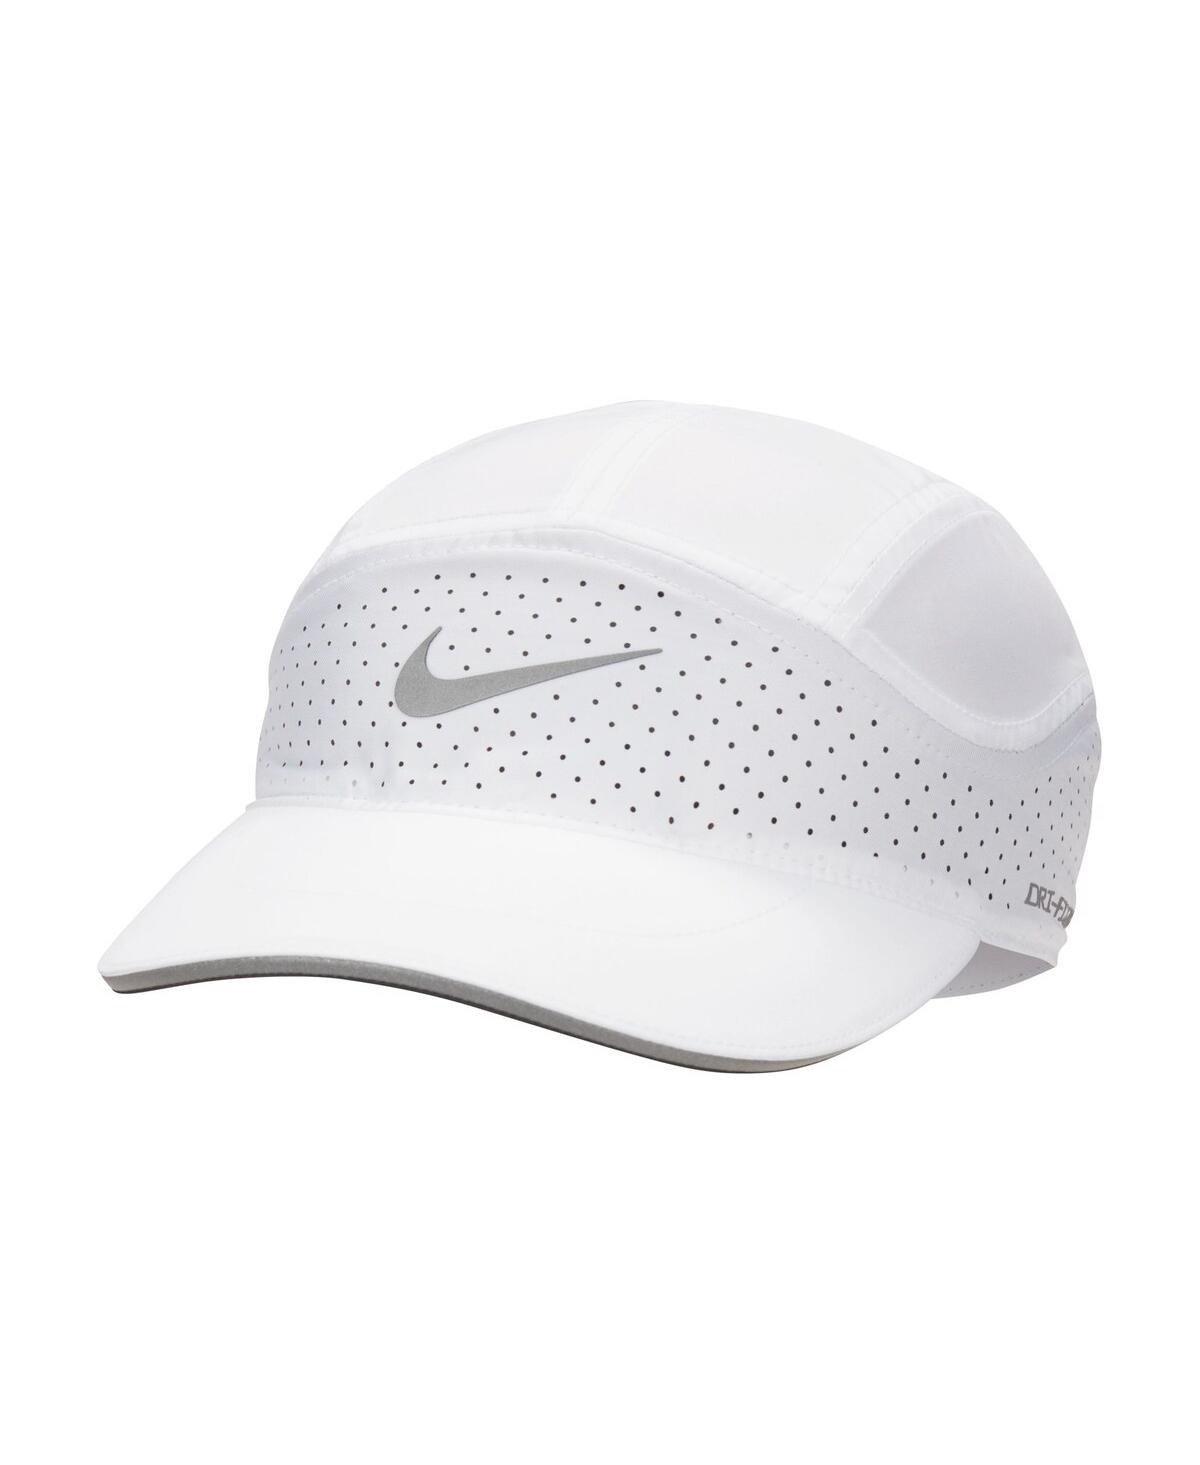 Nike Men's And Women's  White Reflective Fly Performance Adjustable Hat